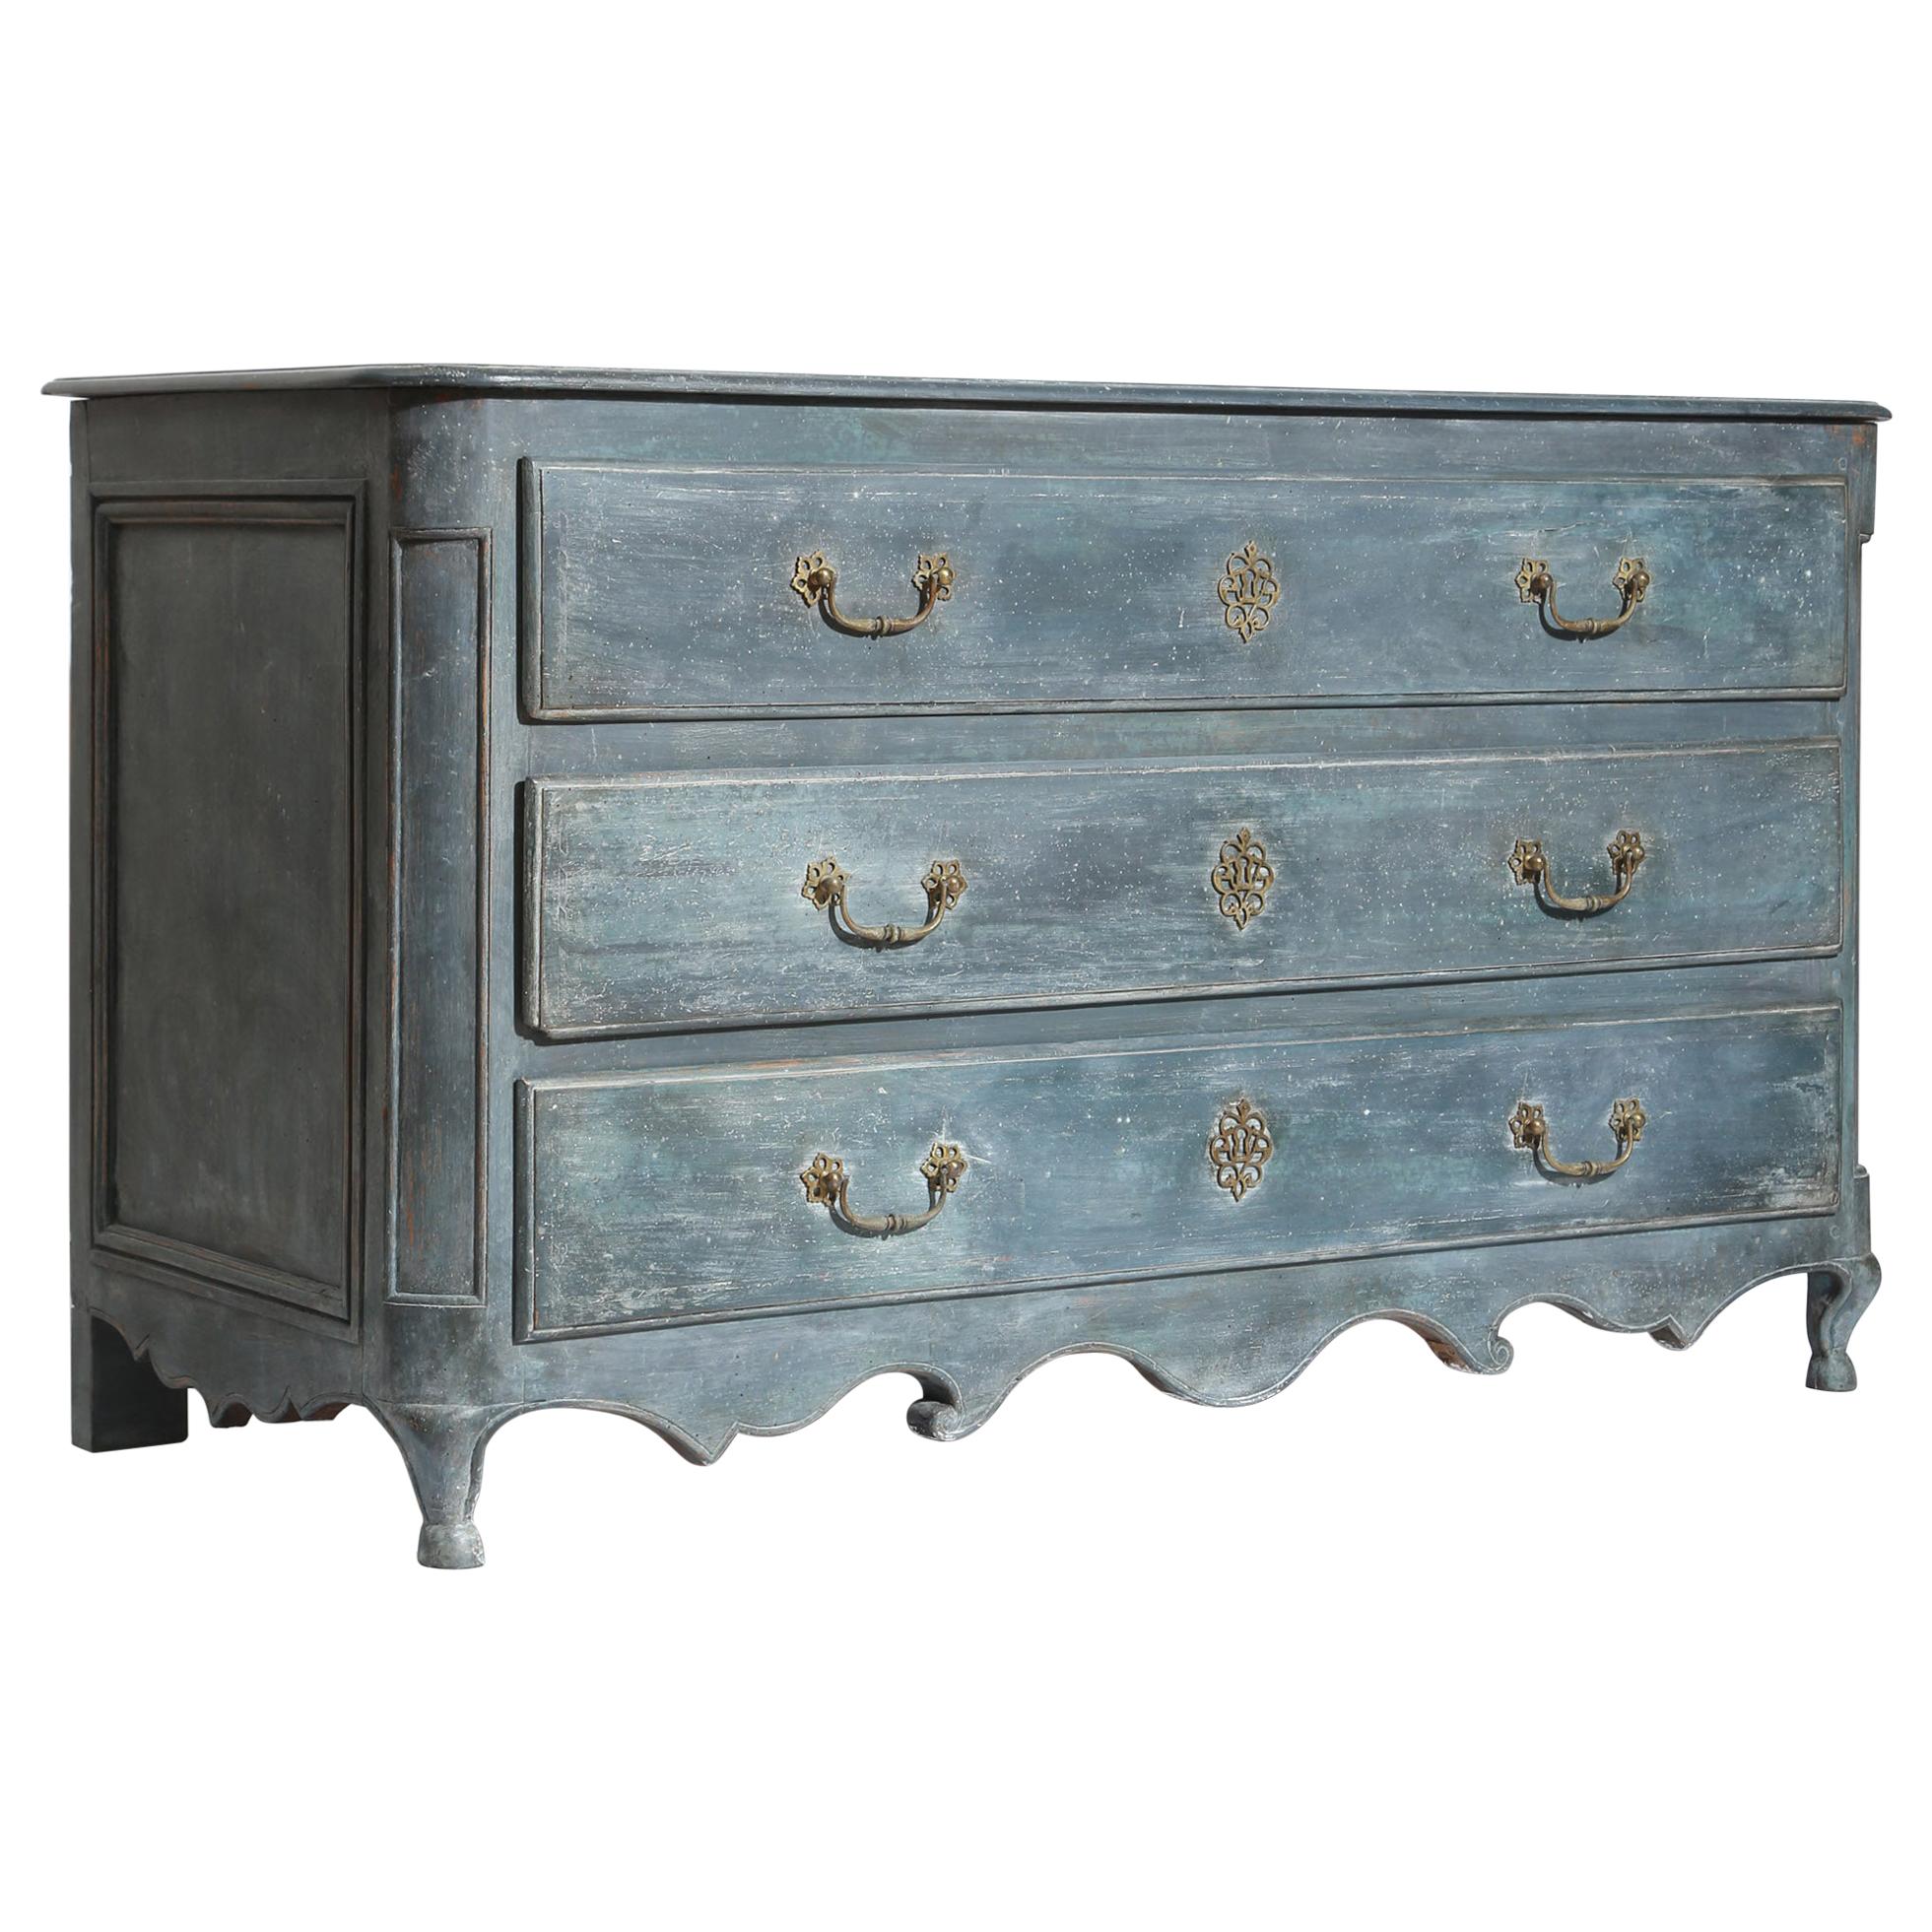 French Late 19th Century Blue Painted Chest of Drawers or Commode